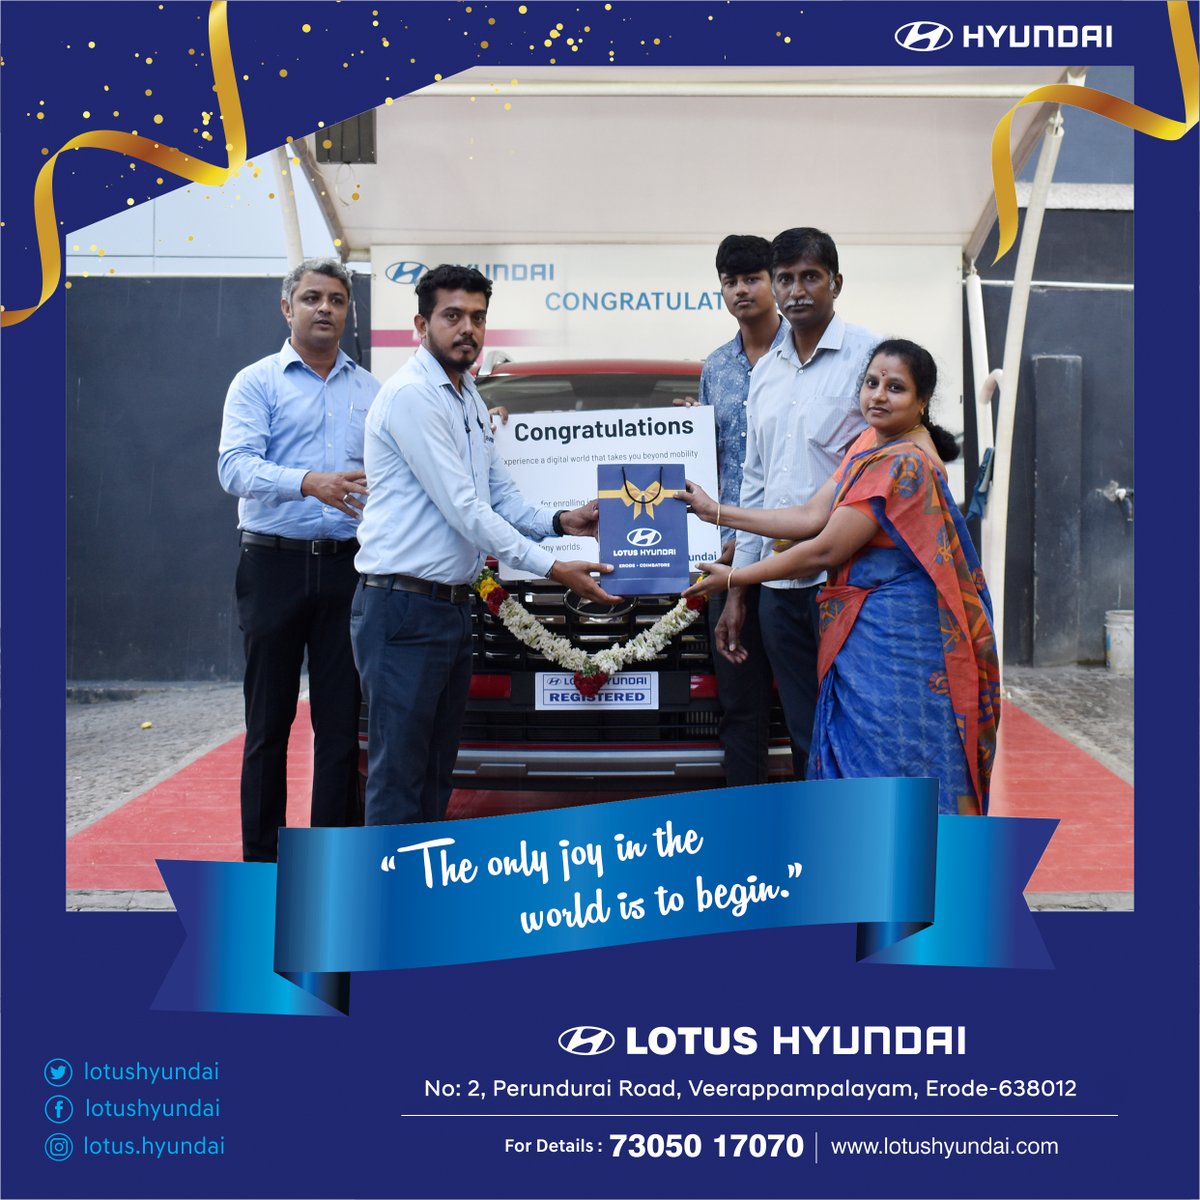 Dear Customer,
On Your New #Hyundai Car, and Welcome you all to the Lotus Hyundai family.Congratulations
We personally thank you for patronizing #lotusHyundai and #Hyundai
Wish you Happy Motoring and Safe Drive
#LotusHyundai #Erode #HappyMotoring #safedrive
Contact 07305017070